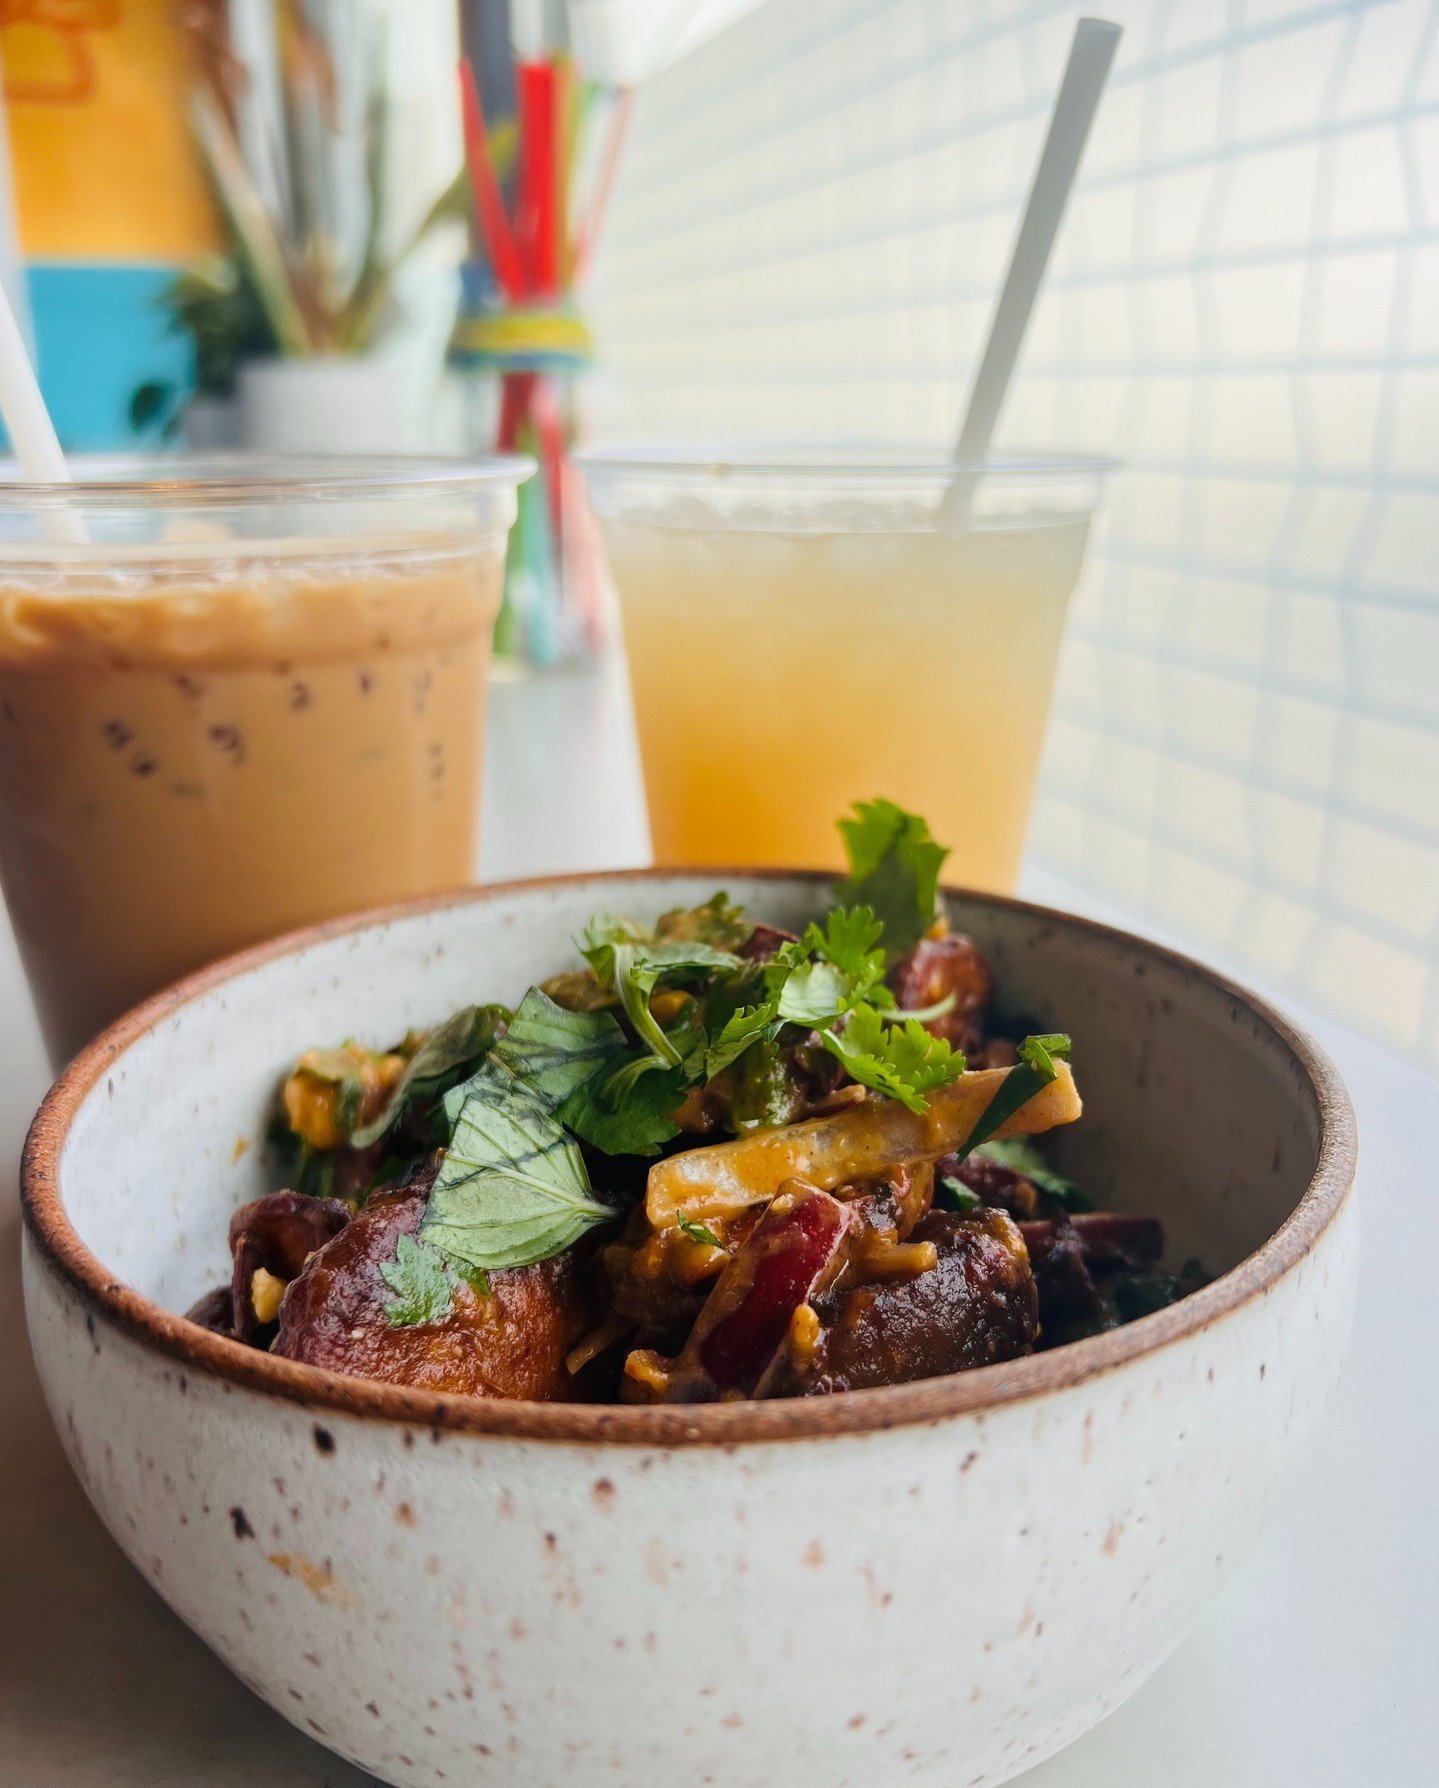 Our Crispy Sweet Potatoes🍠, a Housemade Limeade🍋 and a Creamy Vietnamese Iced Coffee are the perfect snacks for #meatlessmonday